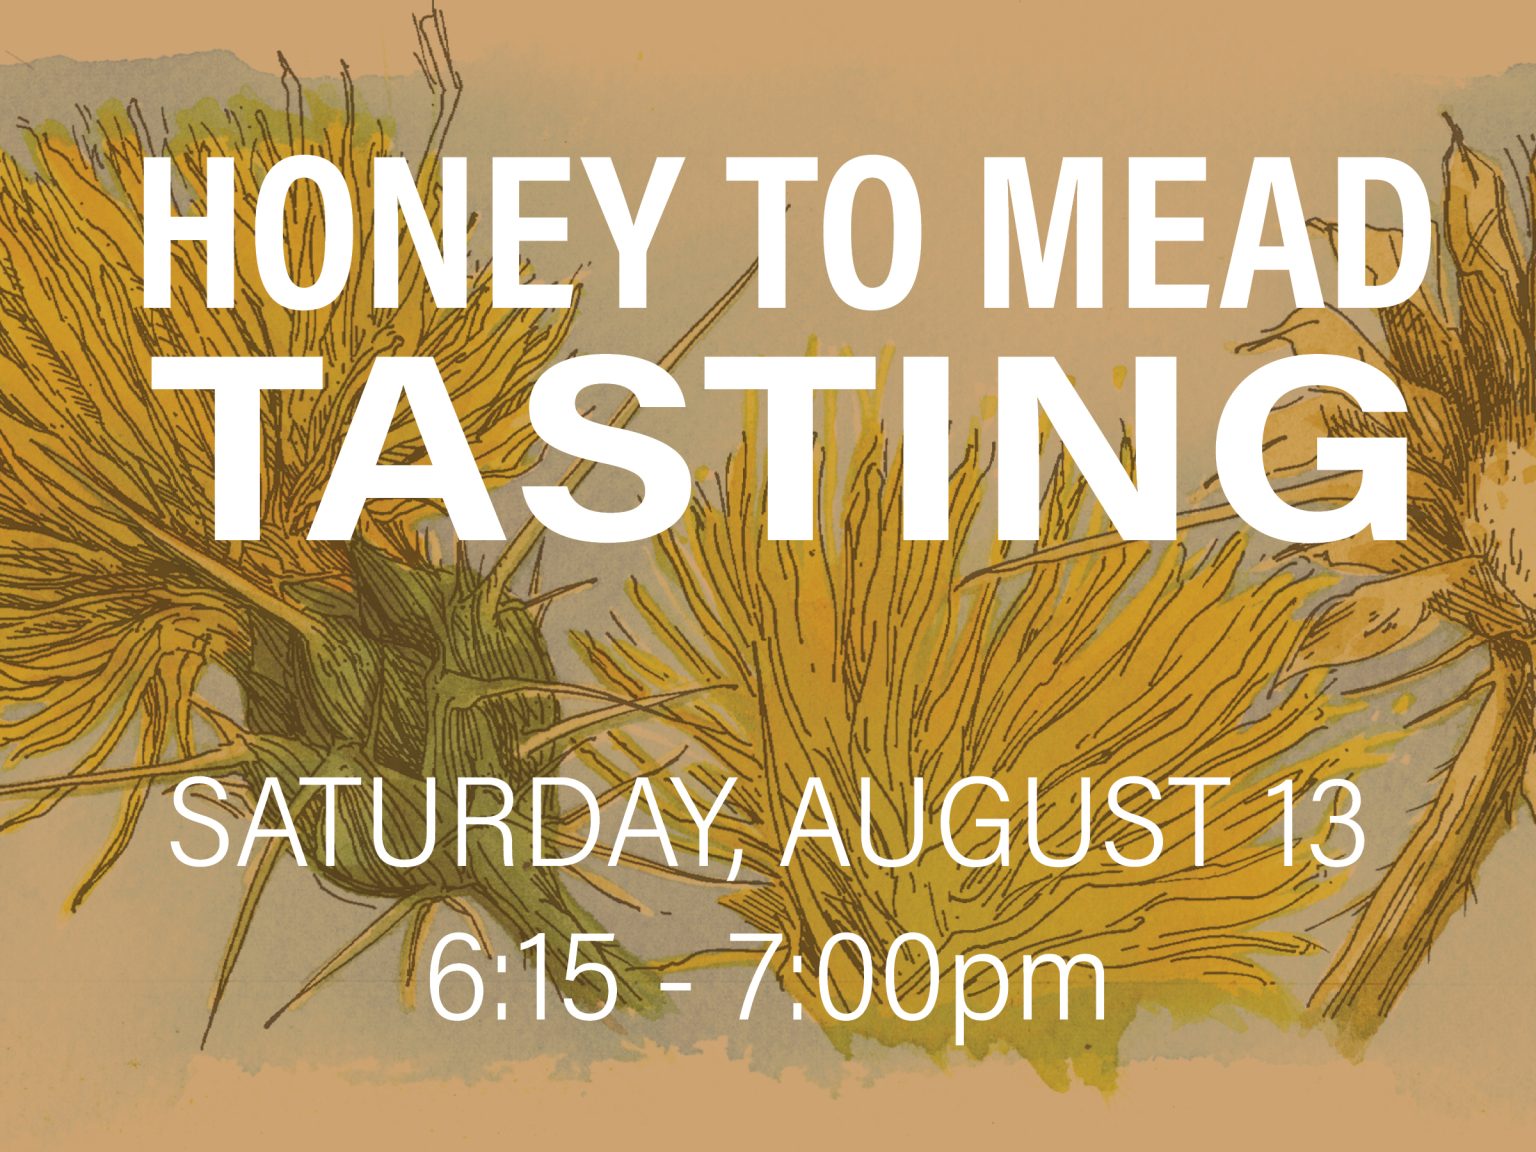 Promotional image: Honey to mead tasting in Davis, hosted by The HIVE.